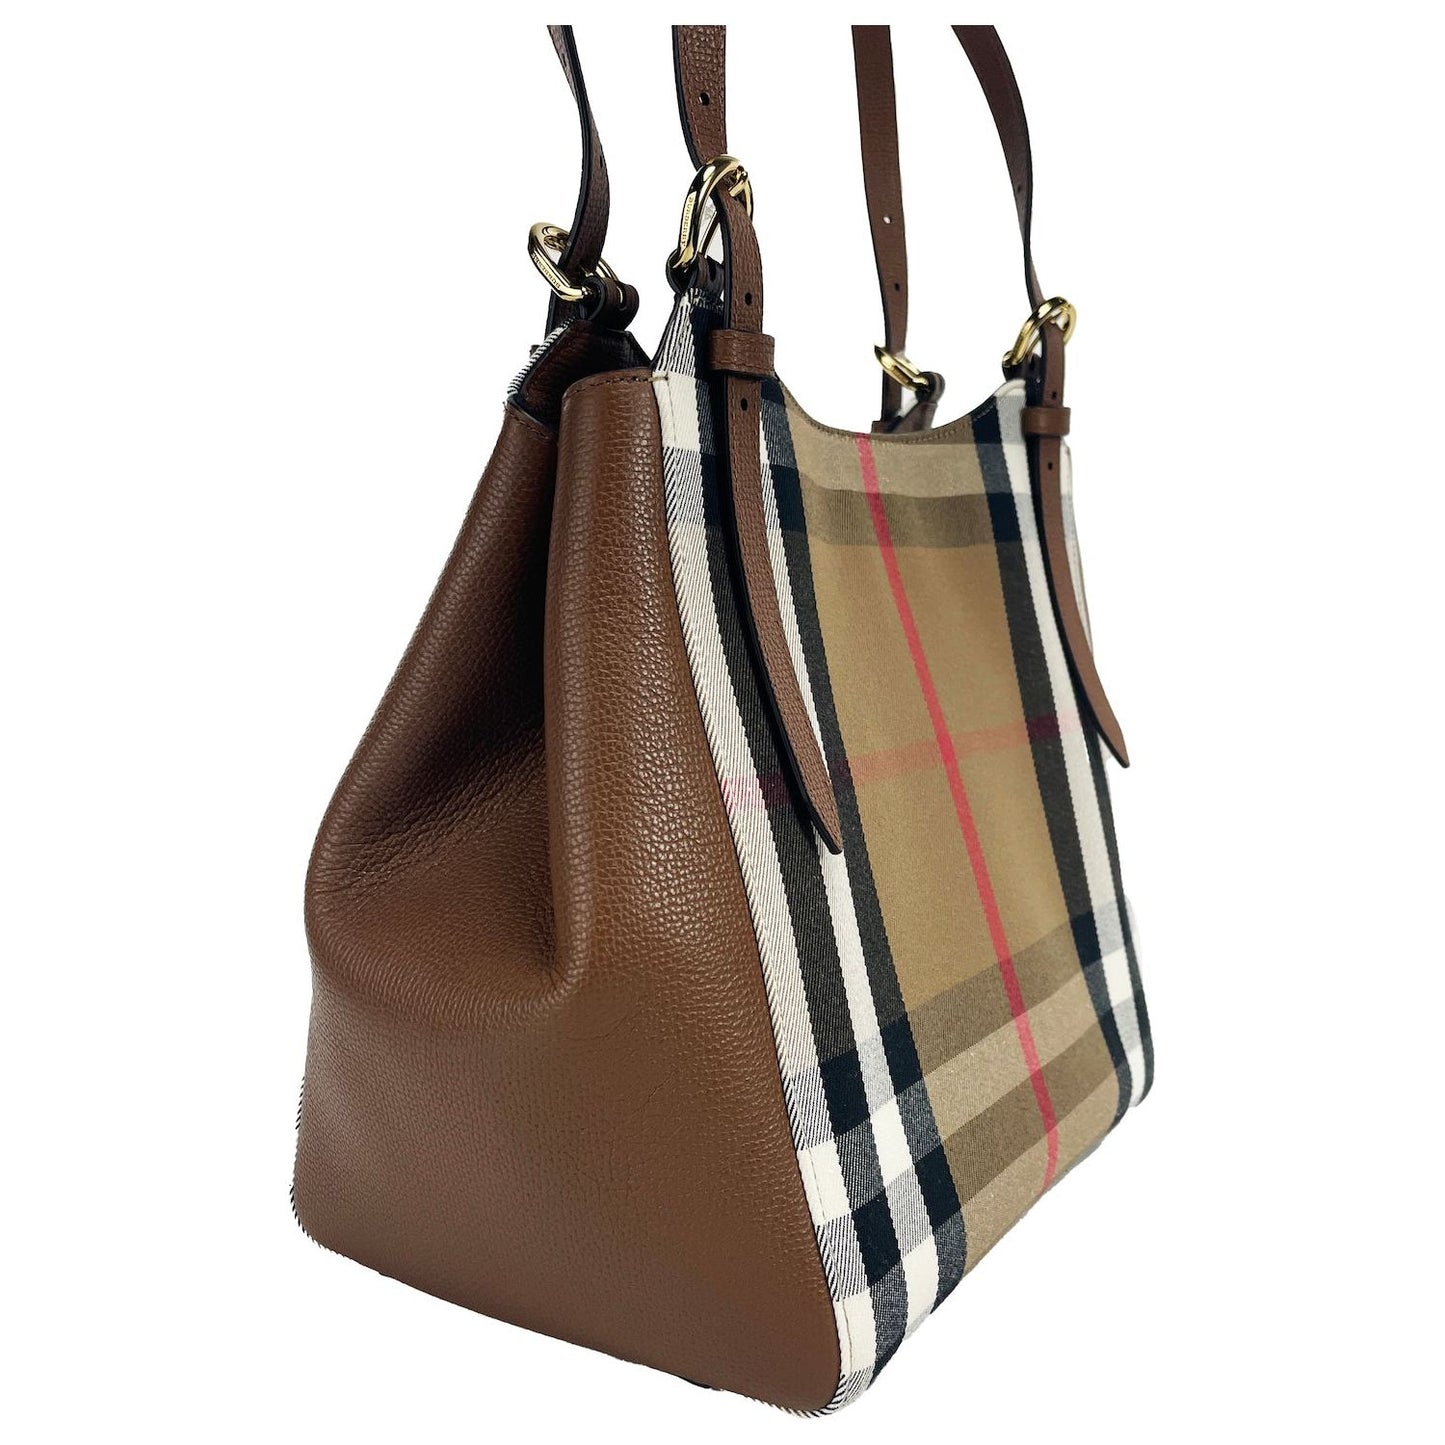 Burberry Small Canterby Tan Leather Check Canvas Tote Bag Purse small-canterby-tan-leather-check-canvas-tote-bag-purse